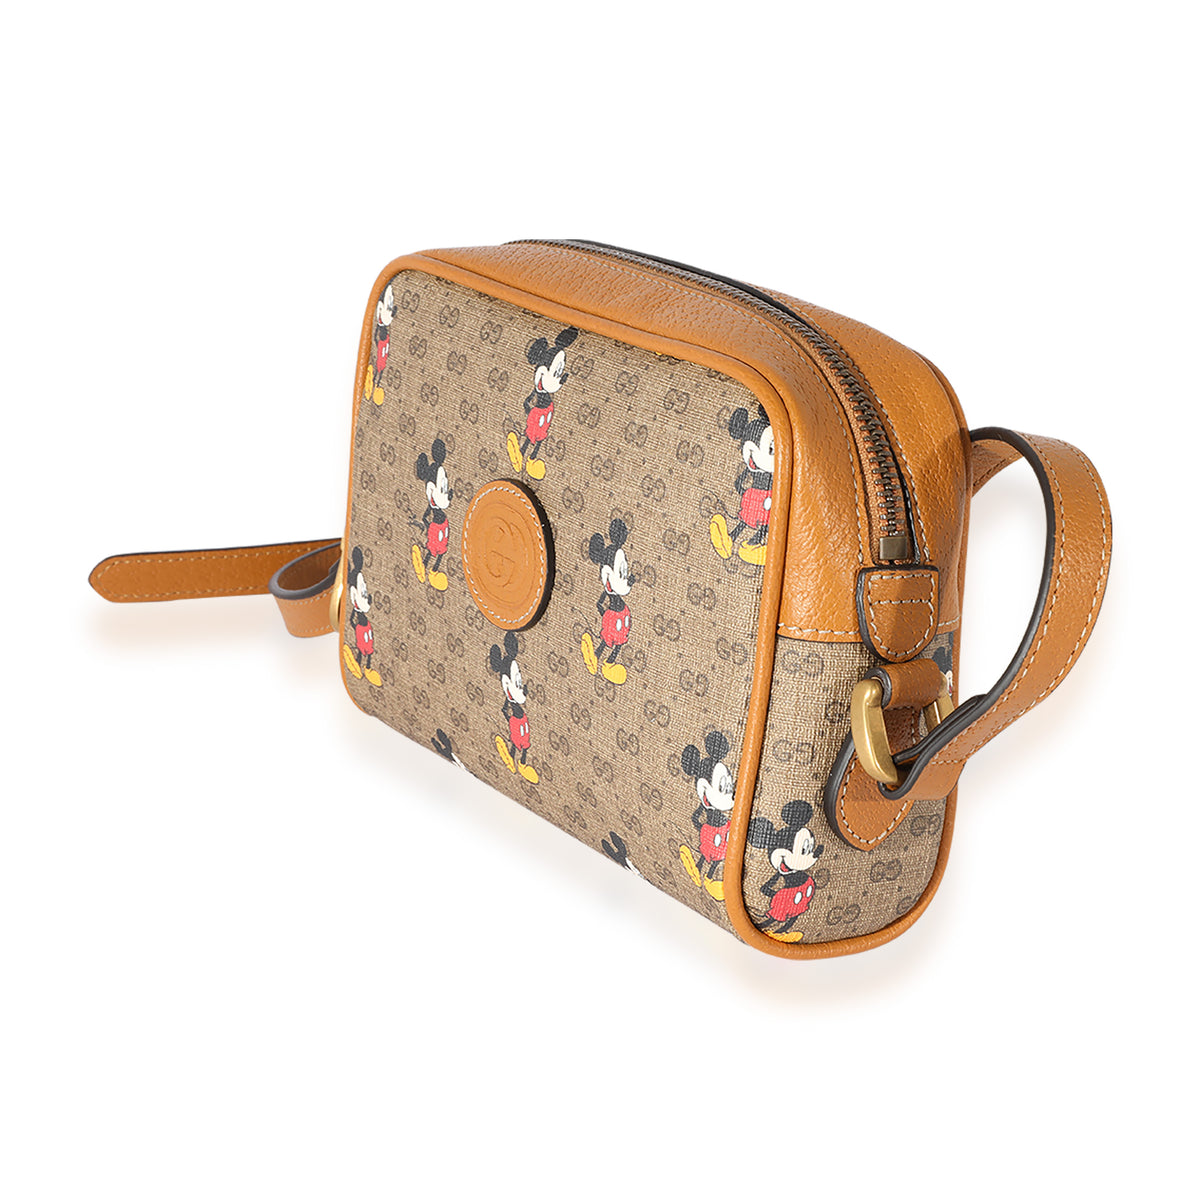 x Disney small backpack | Bags, Leather crossbody bag, Gucci bag